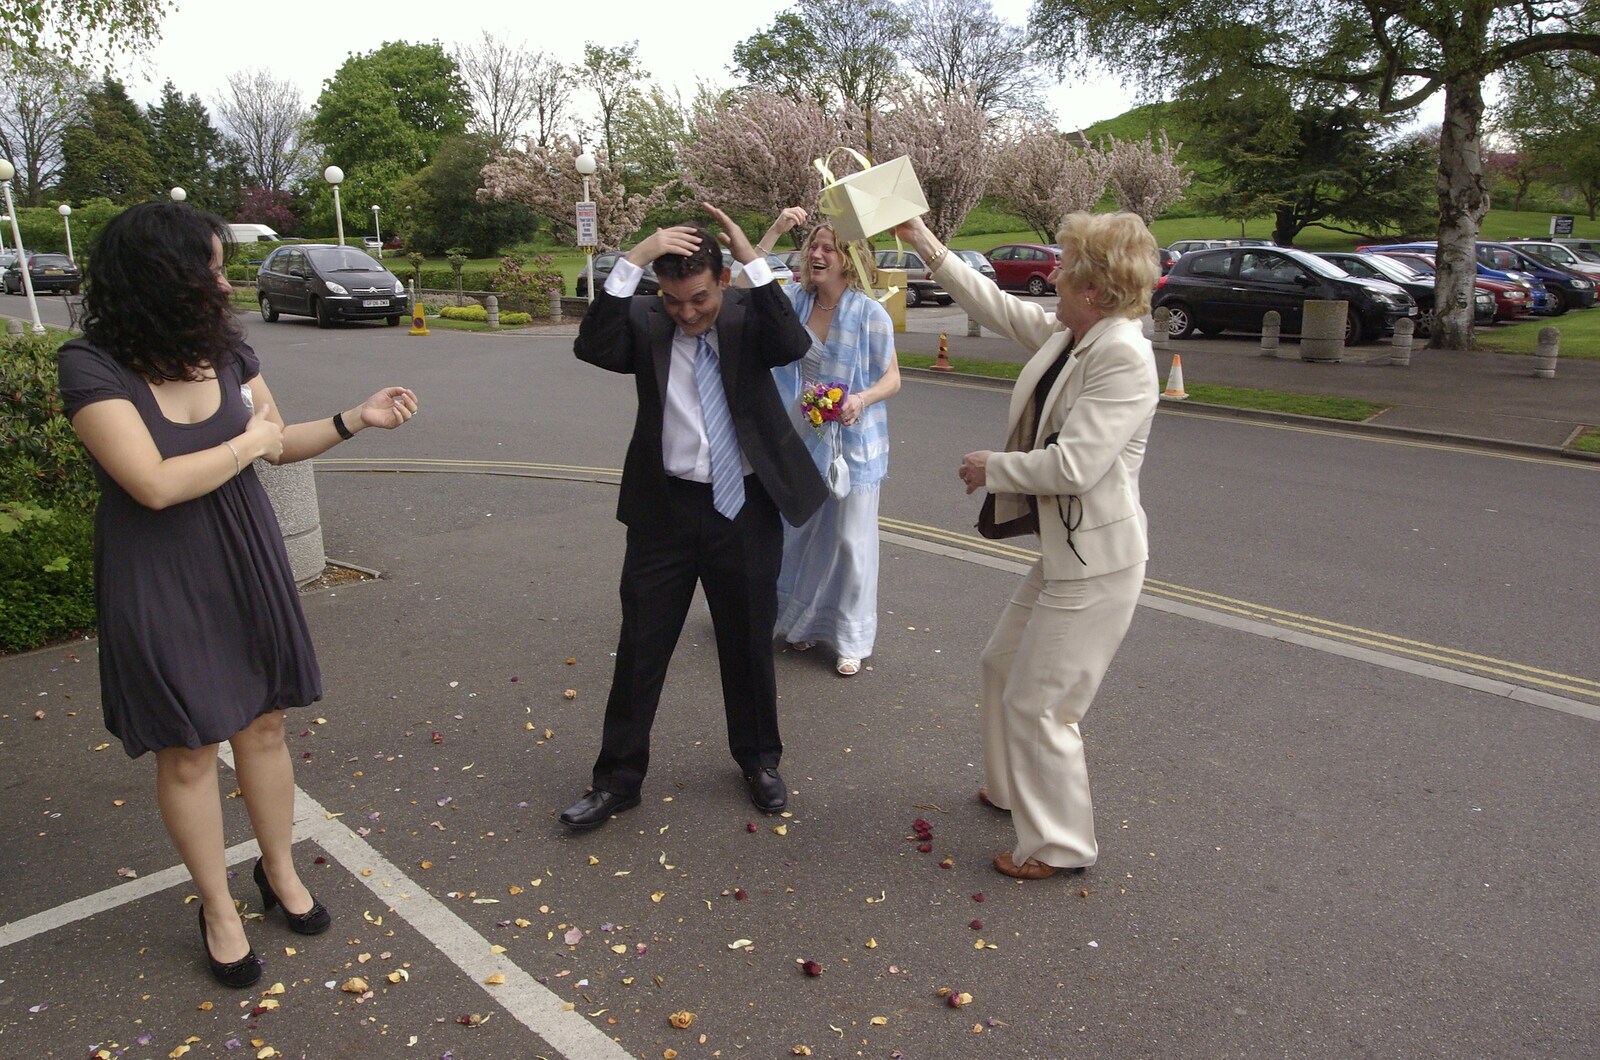 Hani and Anne's Wedding, County Hall, Cambridge - 2nd May 2008: The remains of the confetti is tipped on Hani